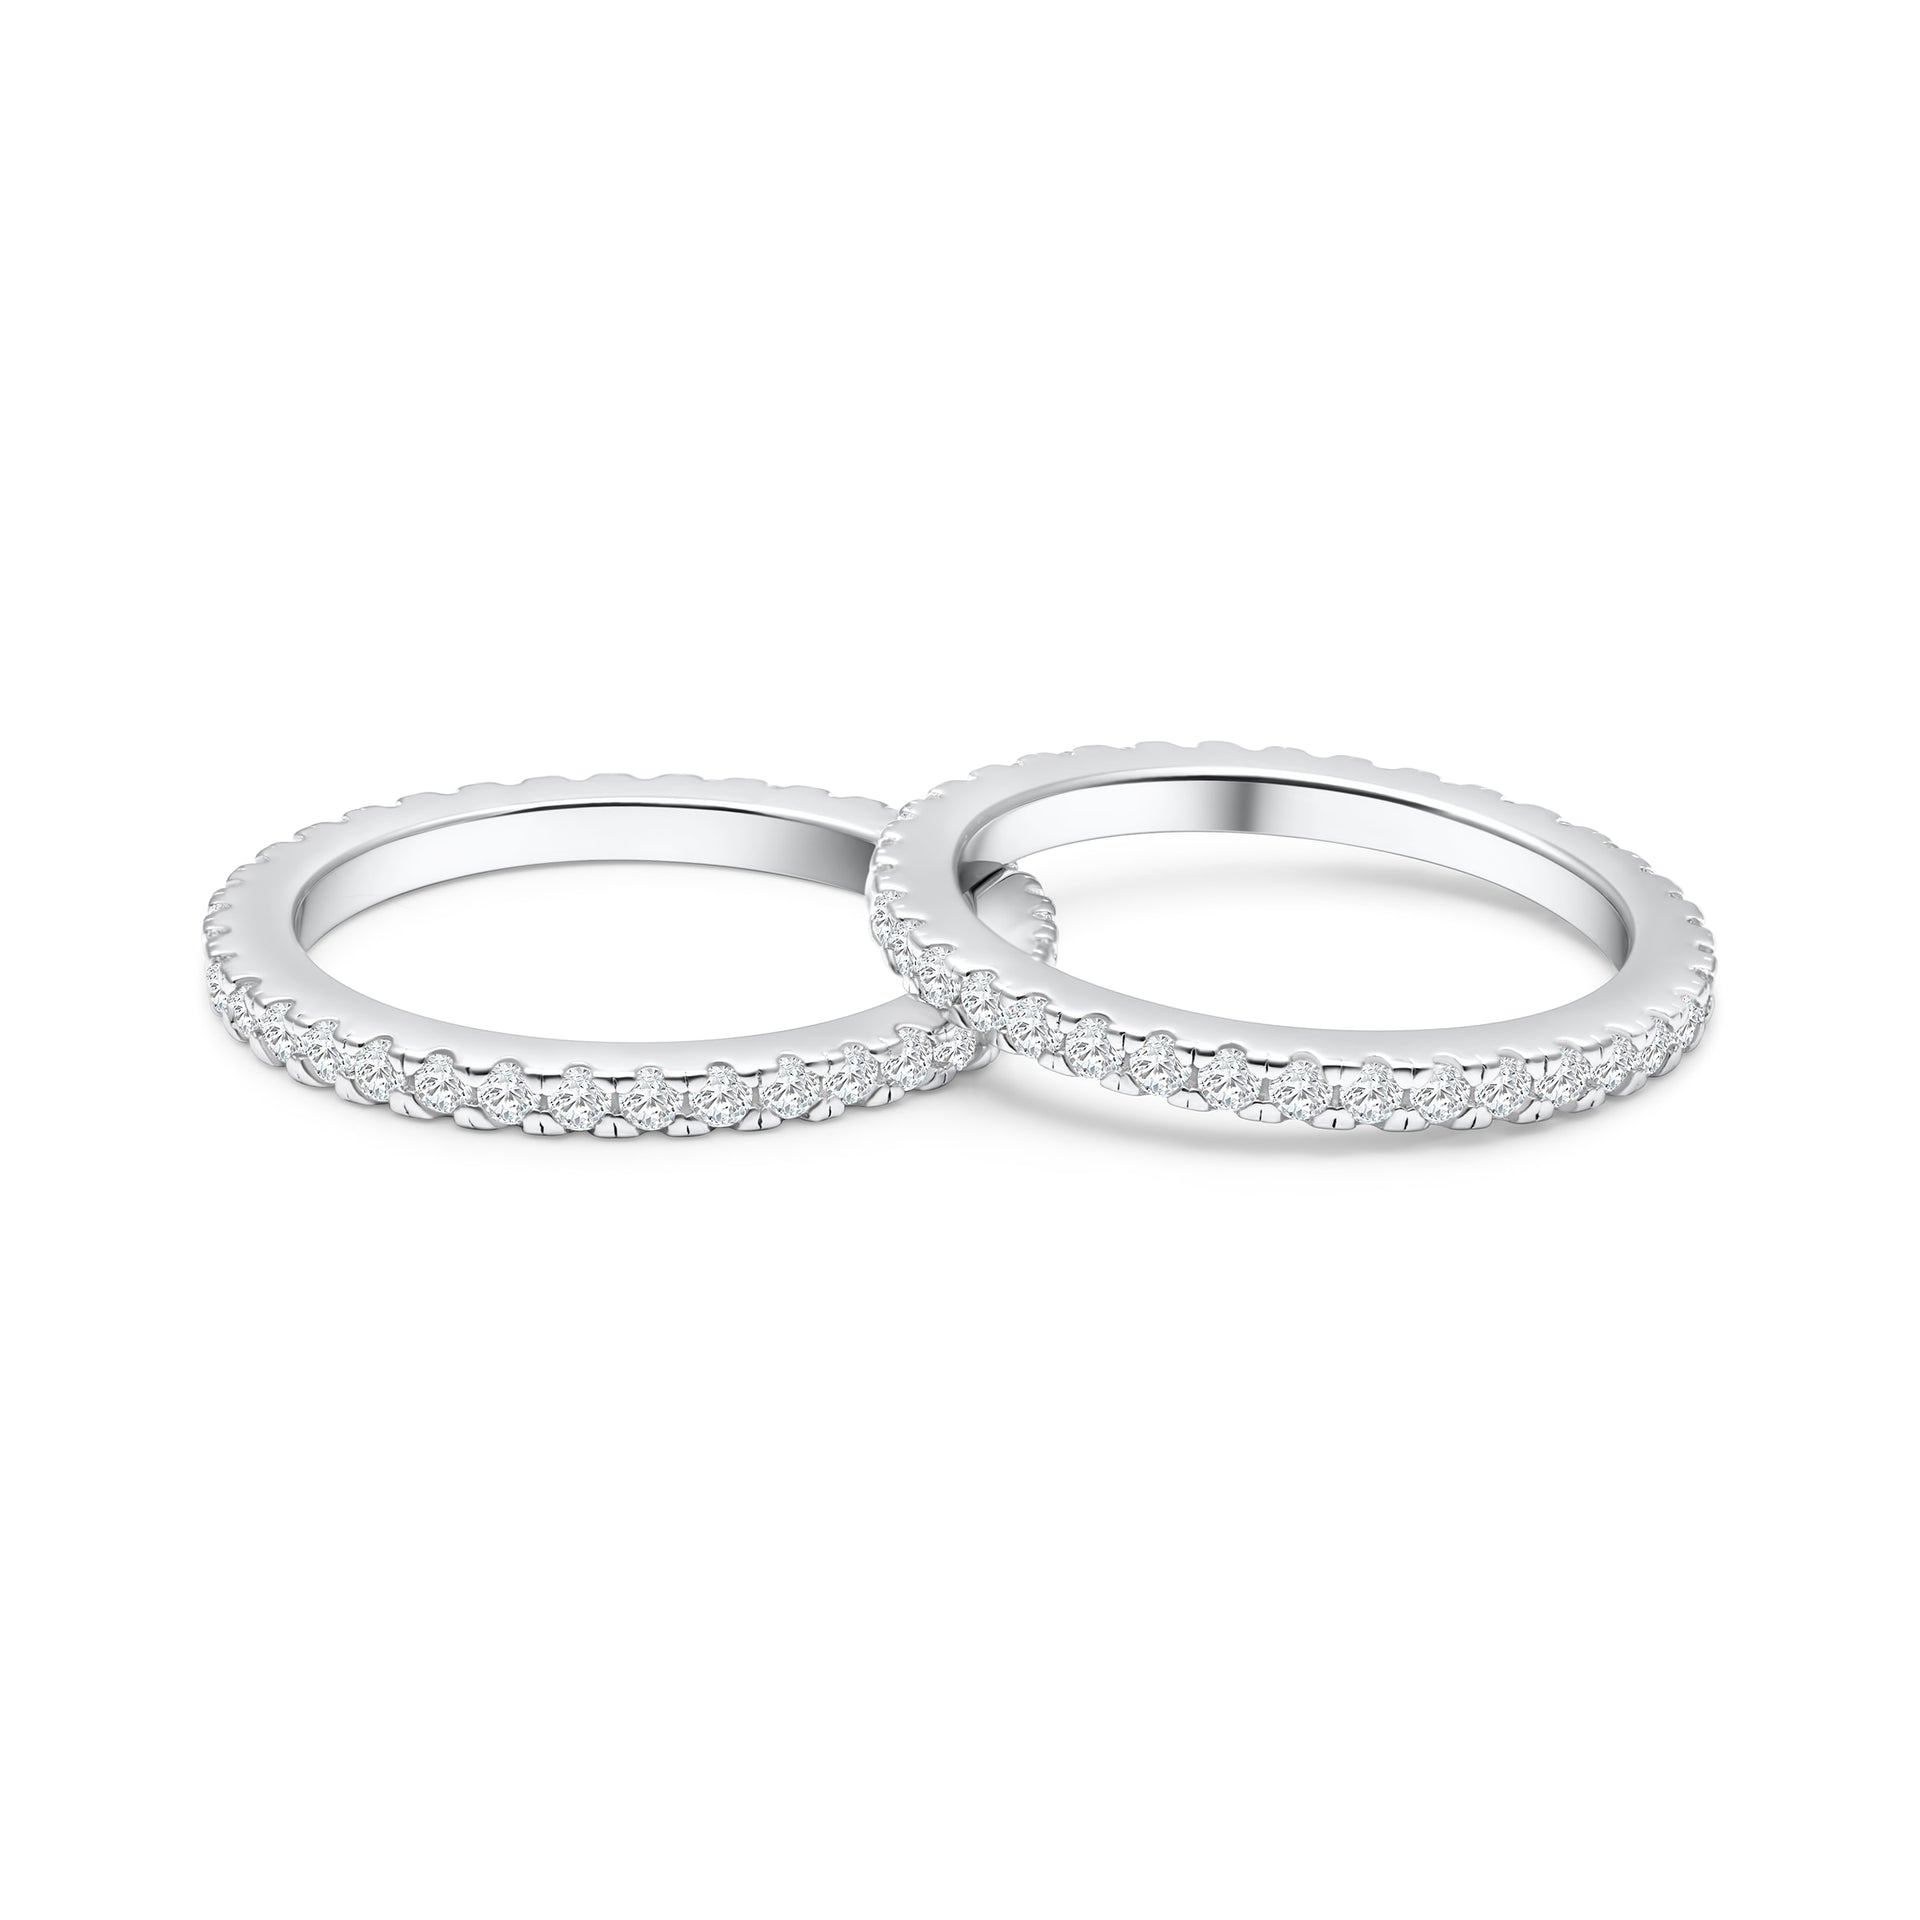 gorgeous wedding band set shown in silver for stacking